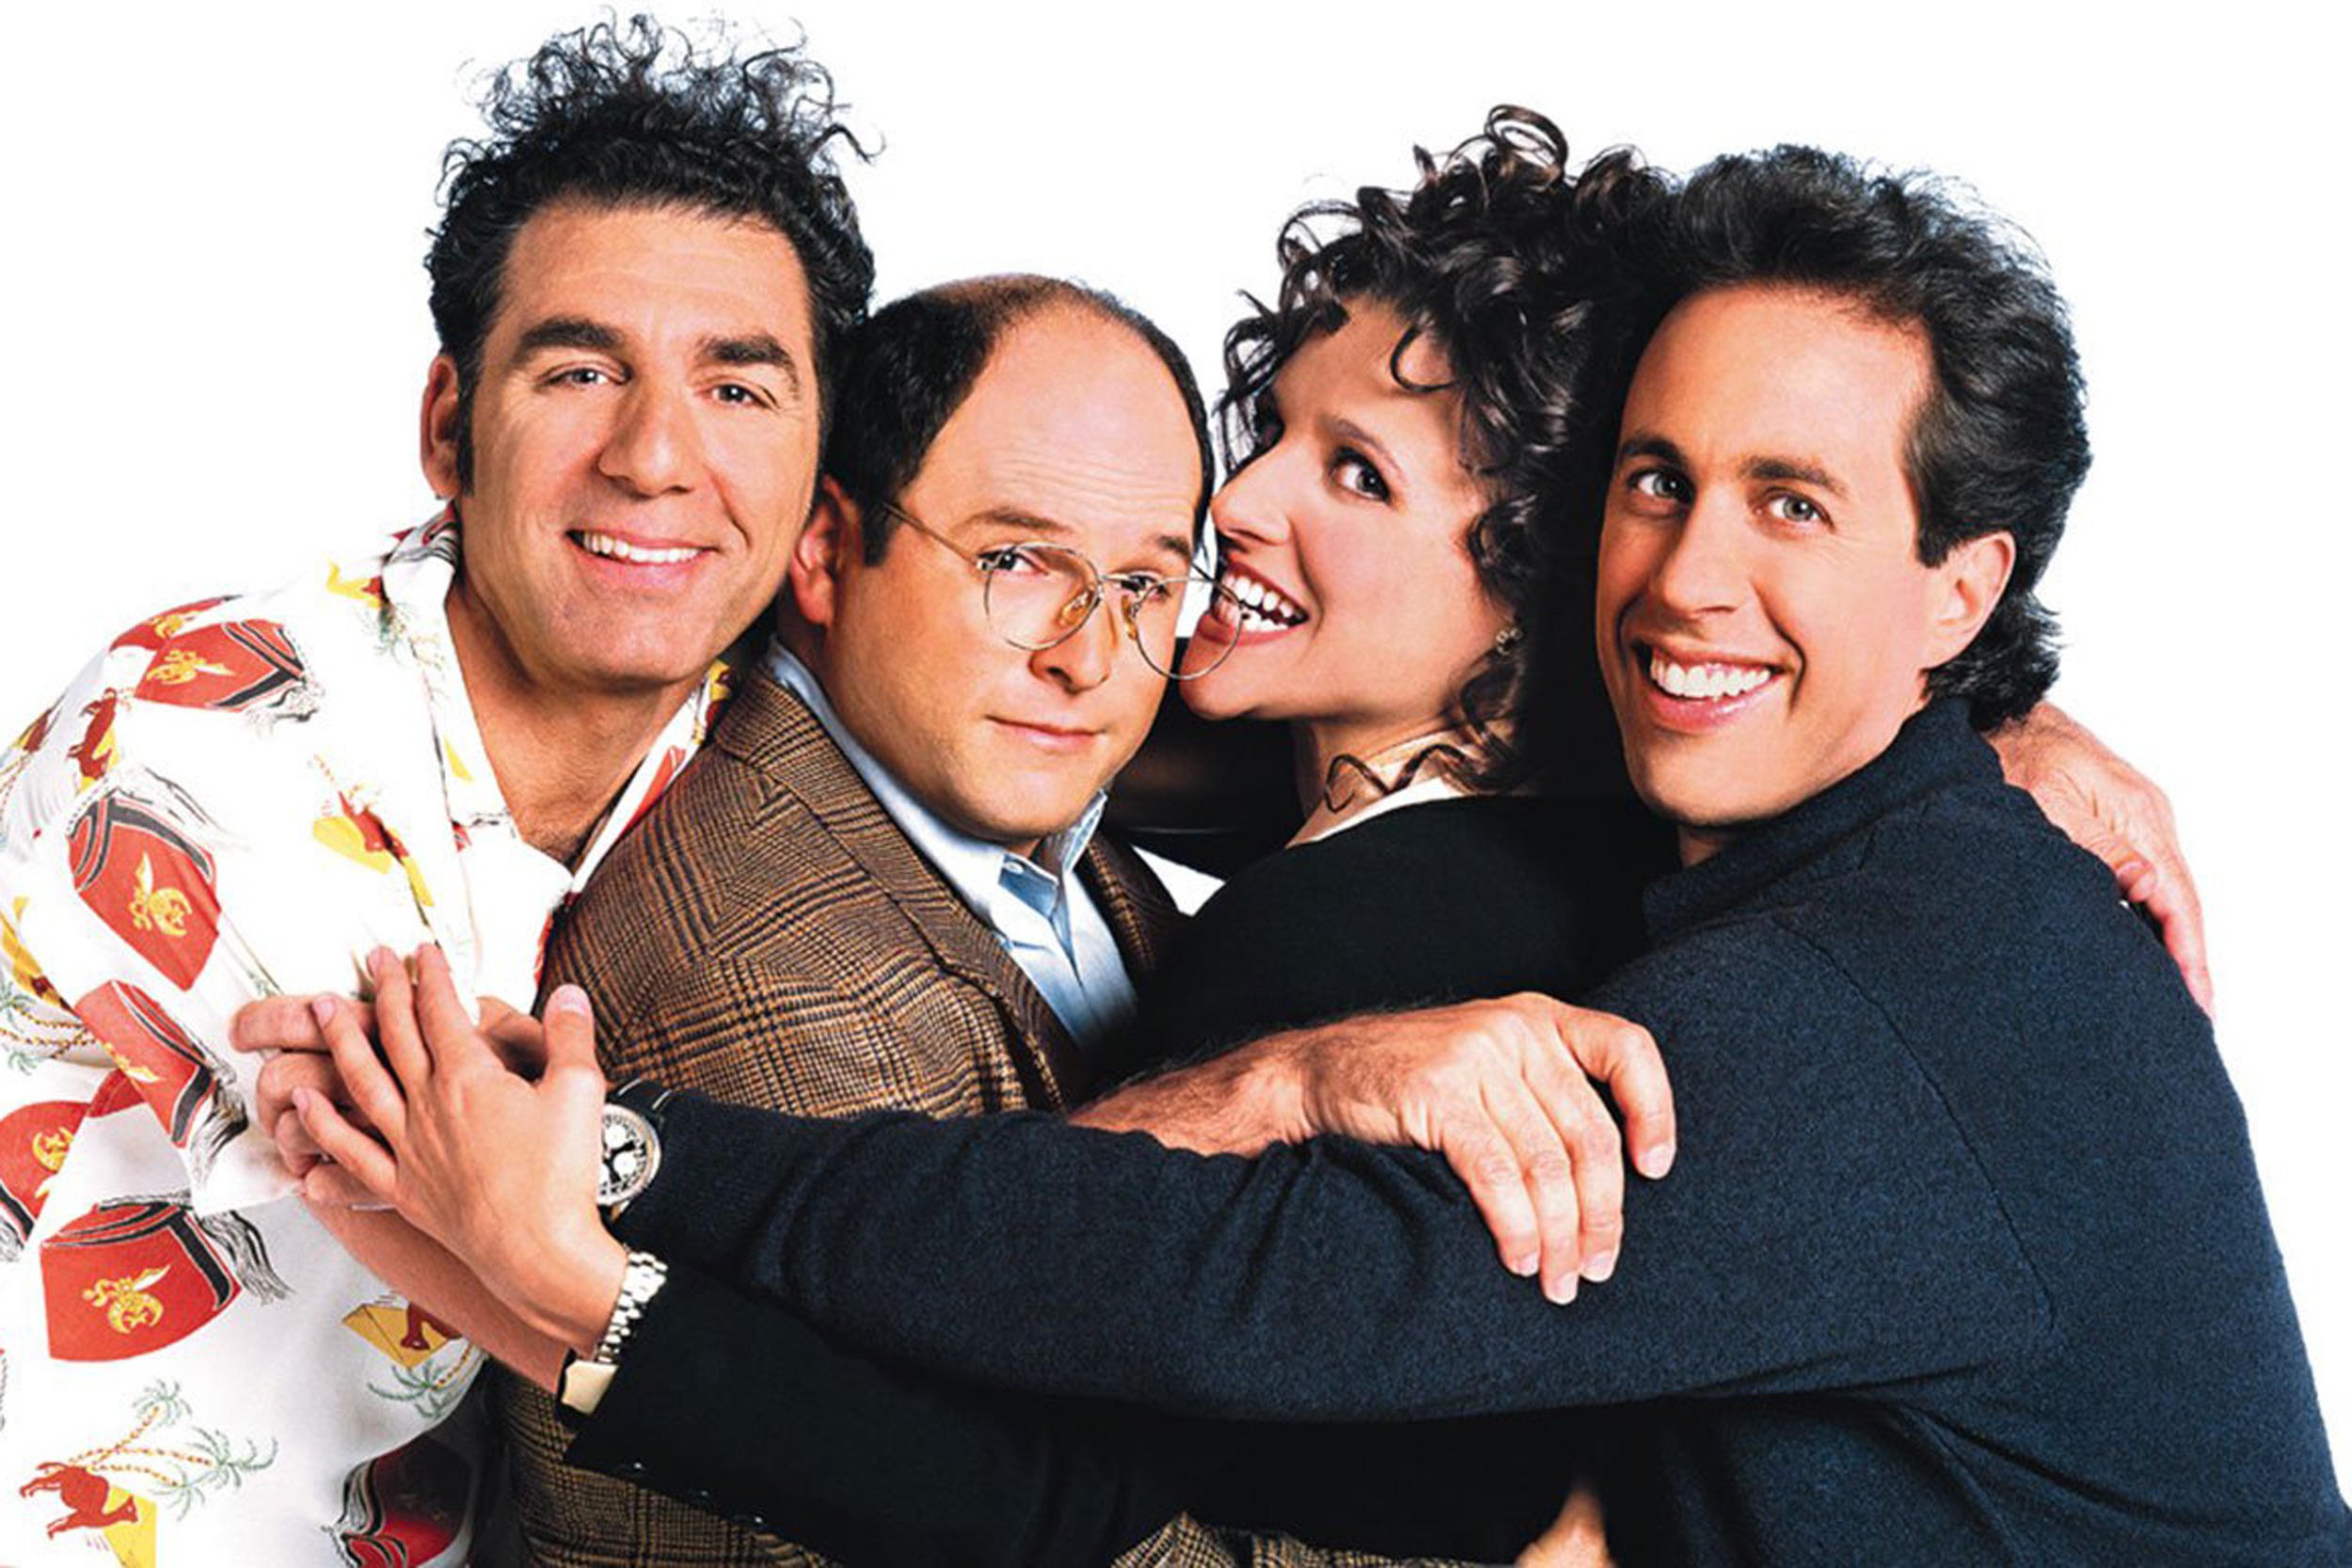 Images of Seinfeld | 2500x1667